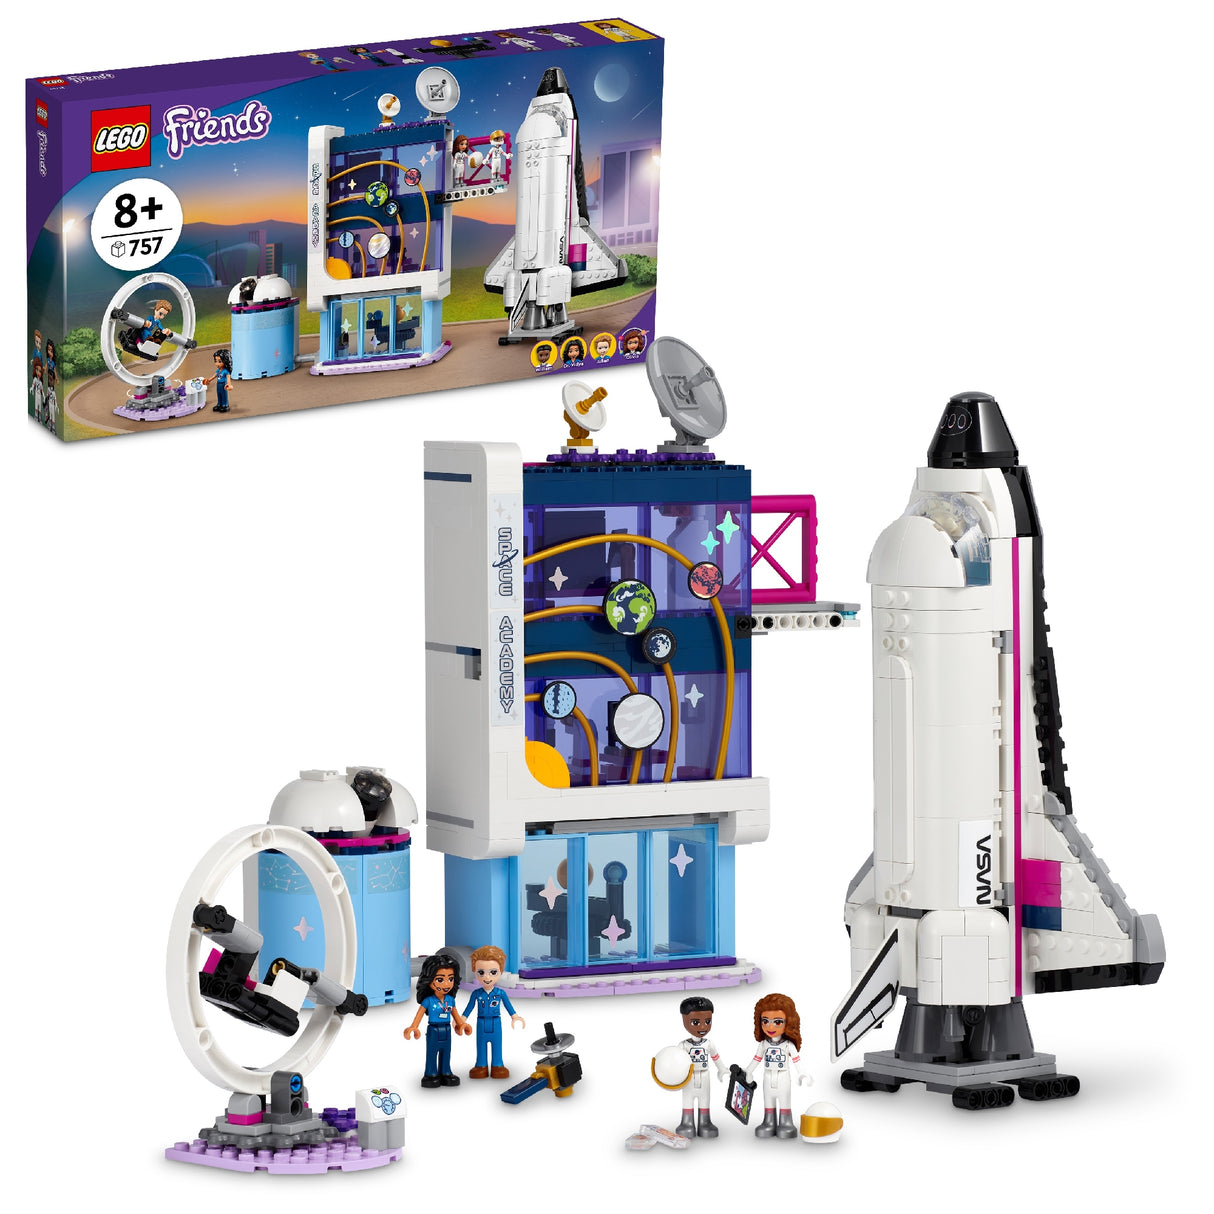 LEGO FRIENDS OLIVIA'S SPACE ACADEMY 41713 AGE: 8+